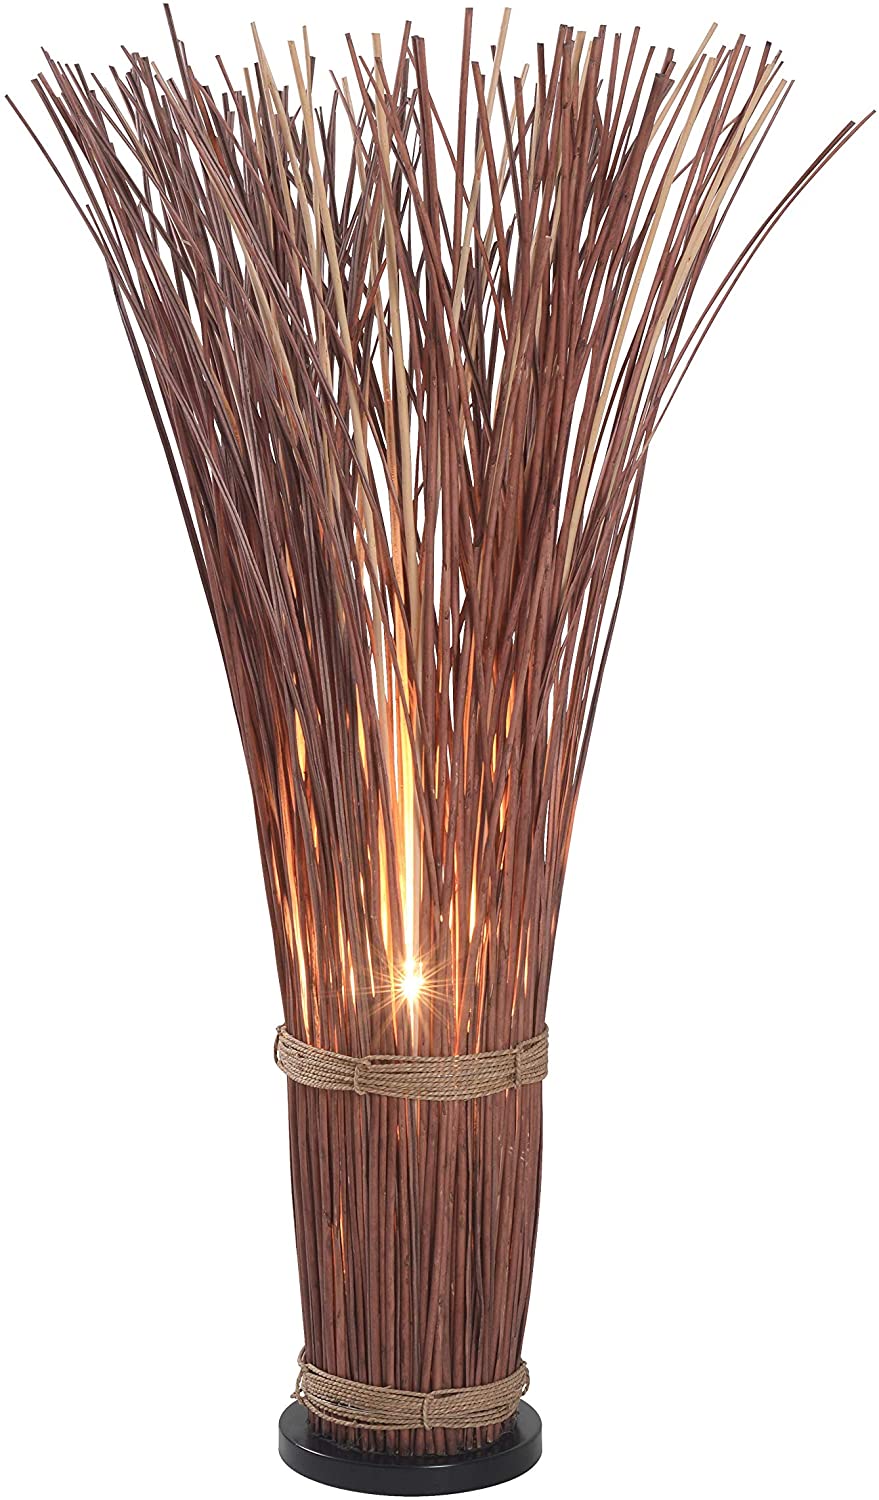 Kenroy-Home-Casual-Floor-Lamp46-Inch-Height-with-Natural-Reed-Finish 15 Unique Artistic Floor Lamps to Light Your Bedroom